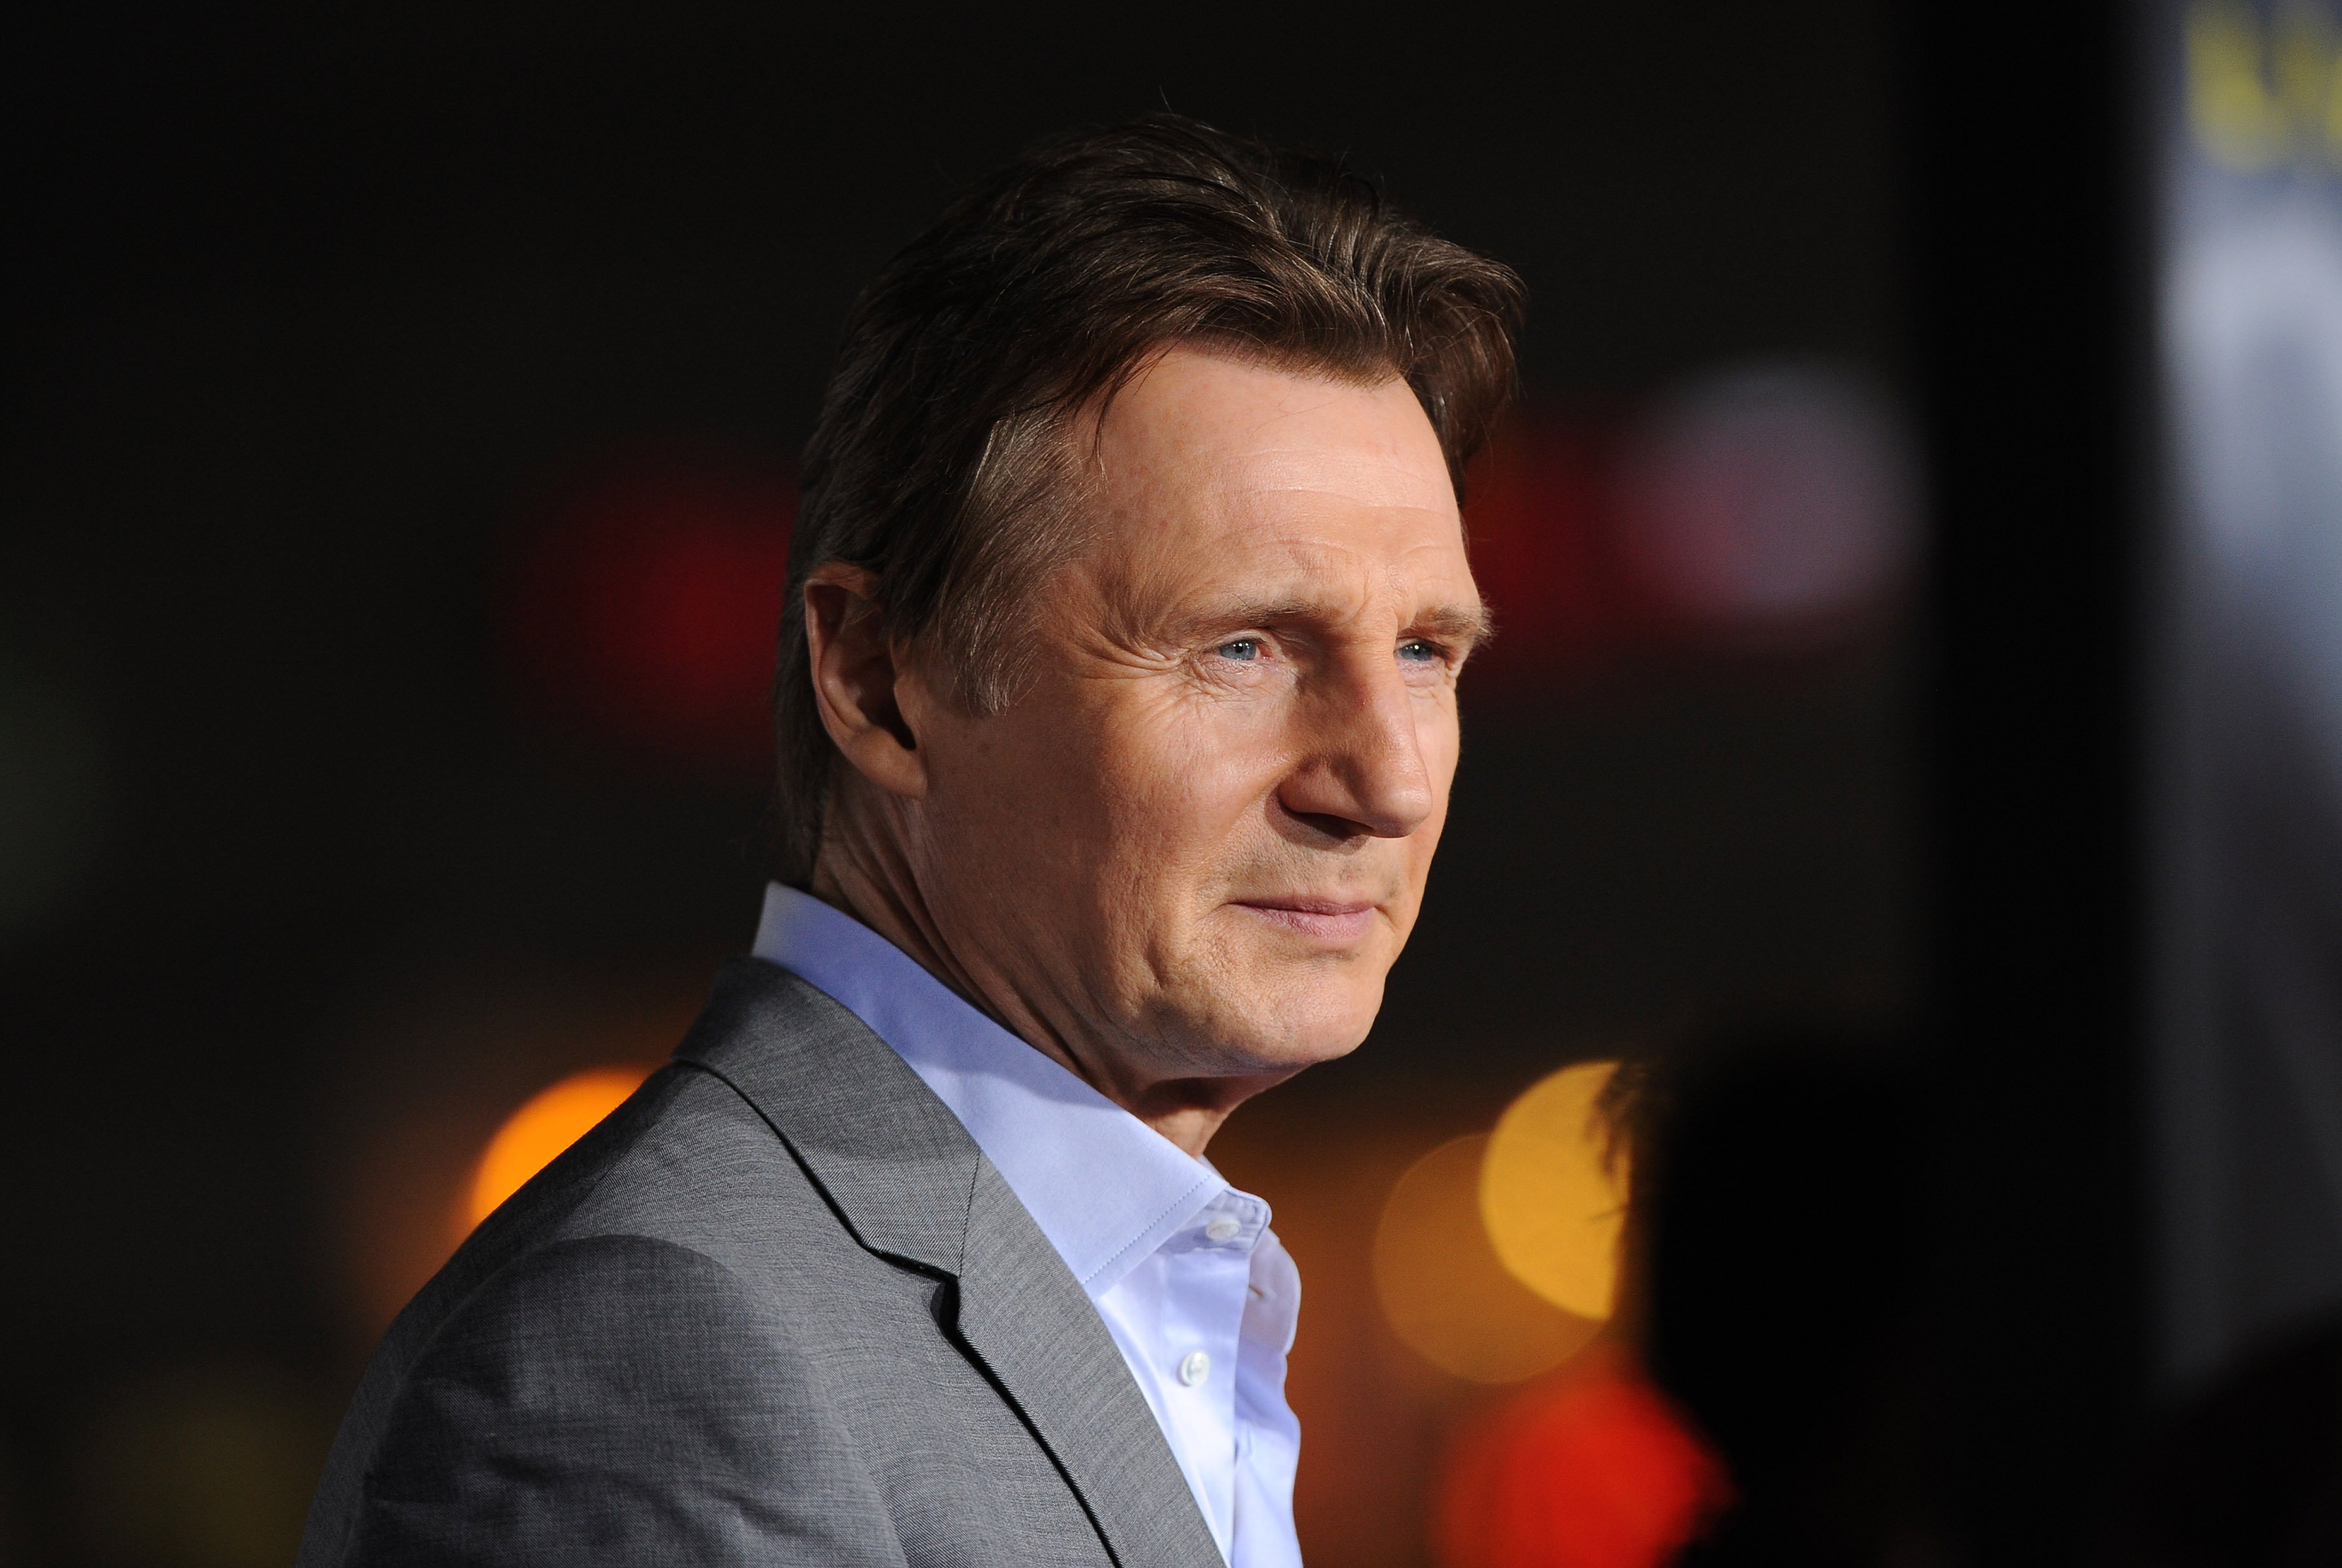 Liam Neeson arriving at the Los Angeles premiere of "Non-Stop" at Regency Village Theatre on February 24, 2014 in Westwood, California. / Source: Getty Images